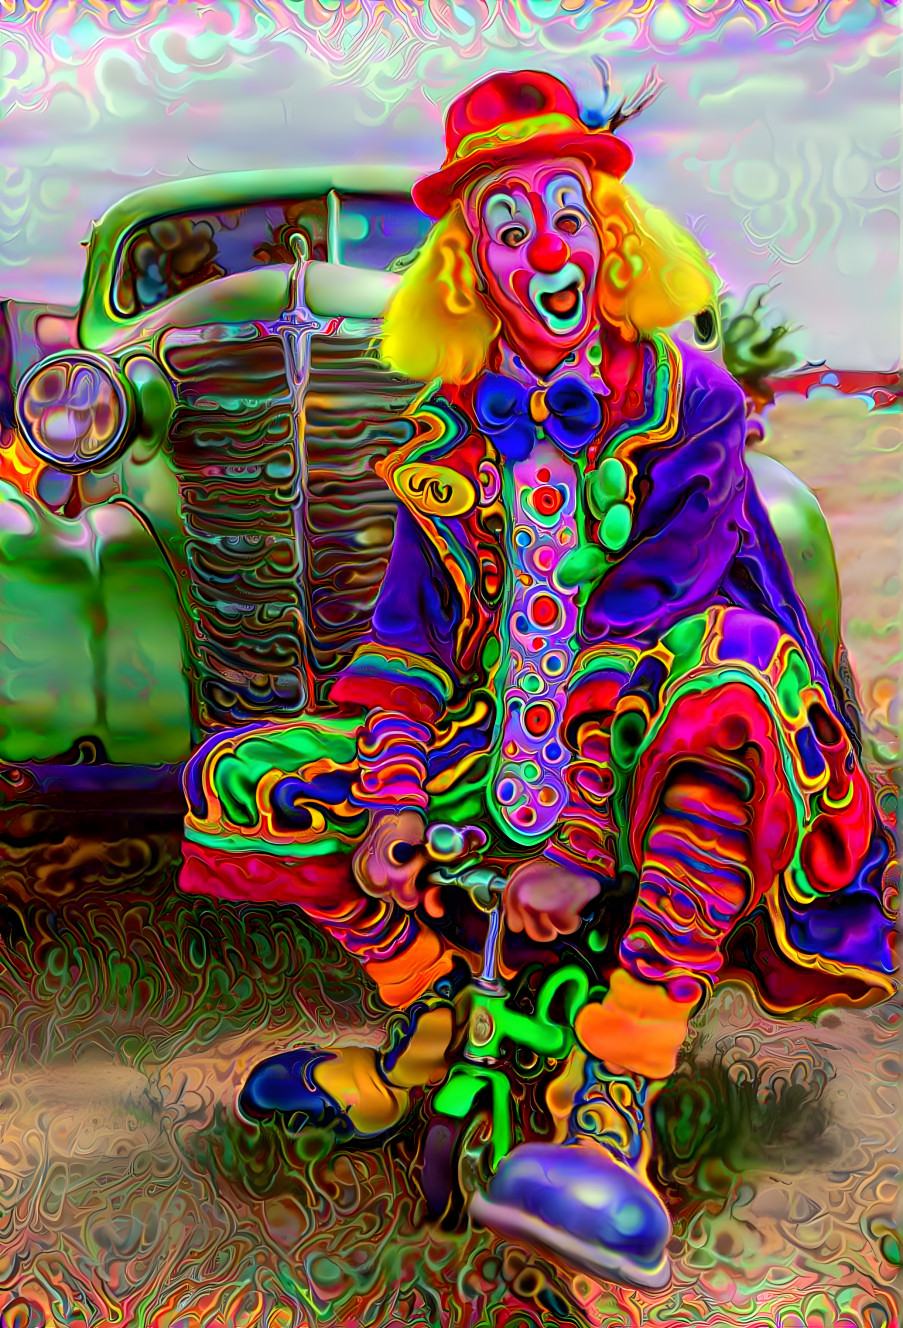 “Psychedelic Clown”